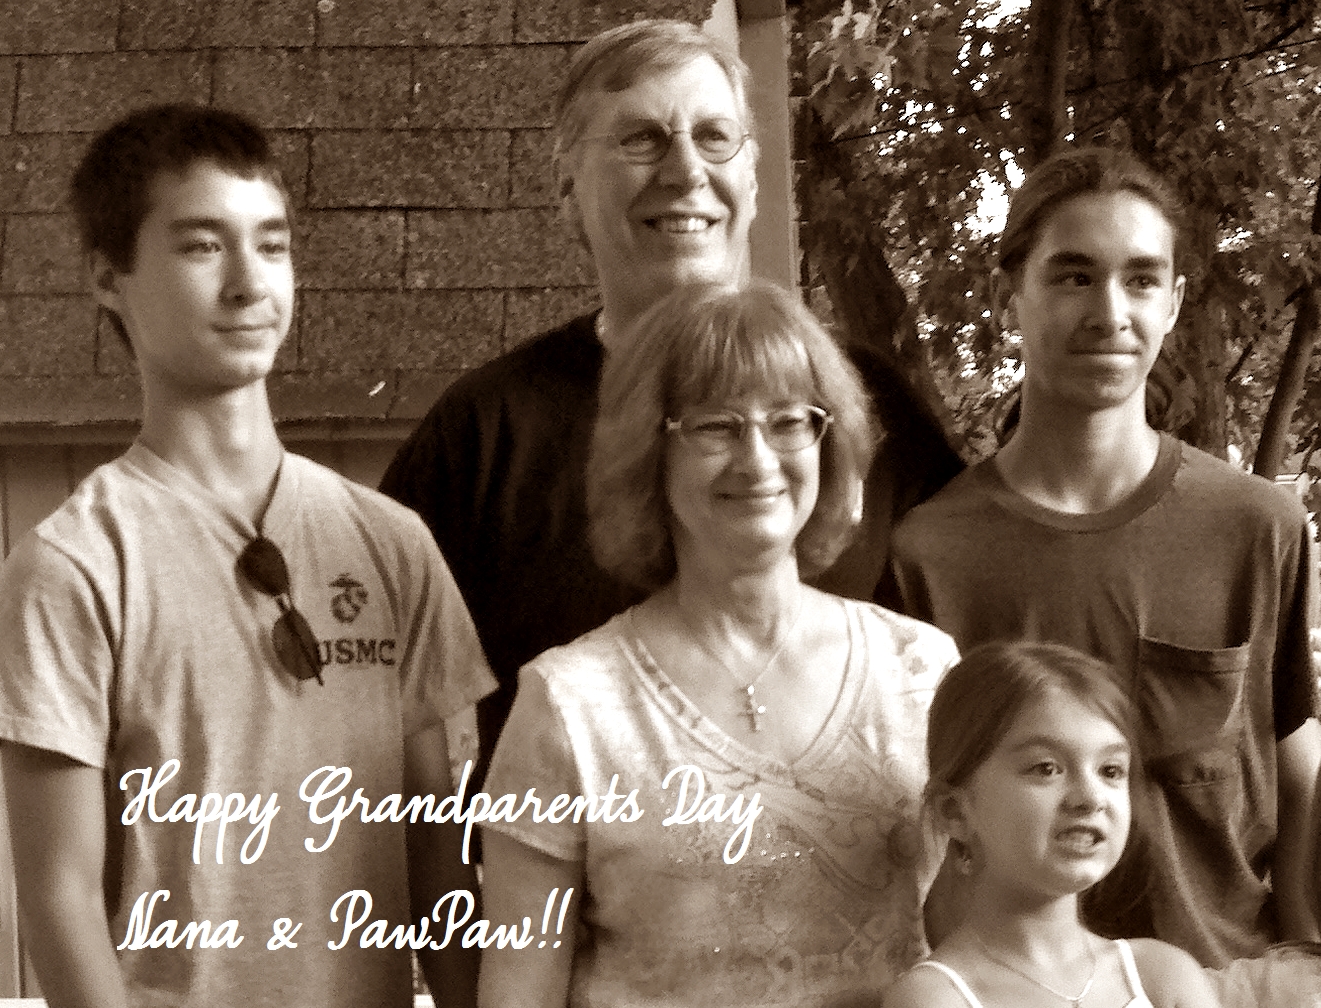 Simply the Good Life: Grandparents Day is Tomorrow!